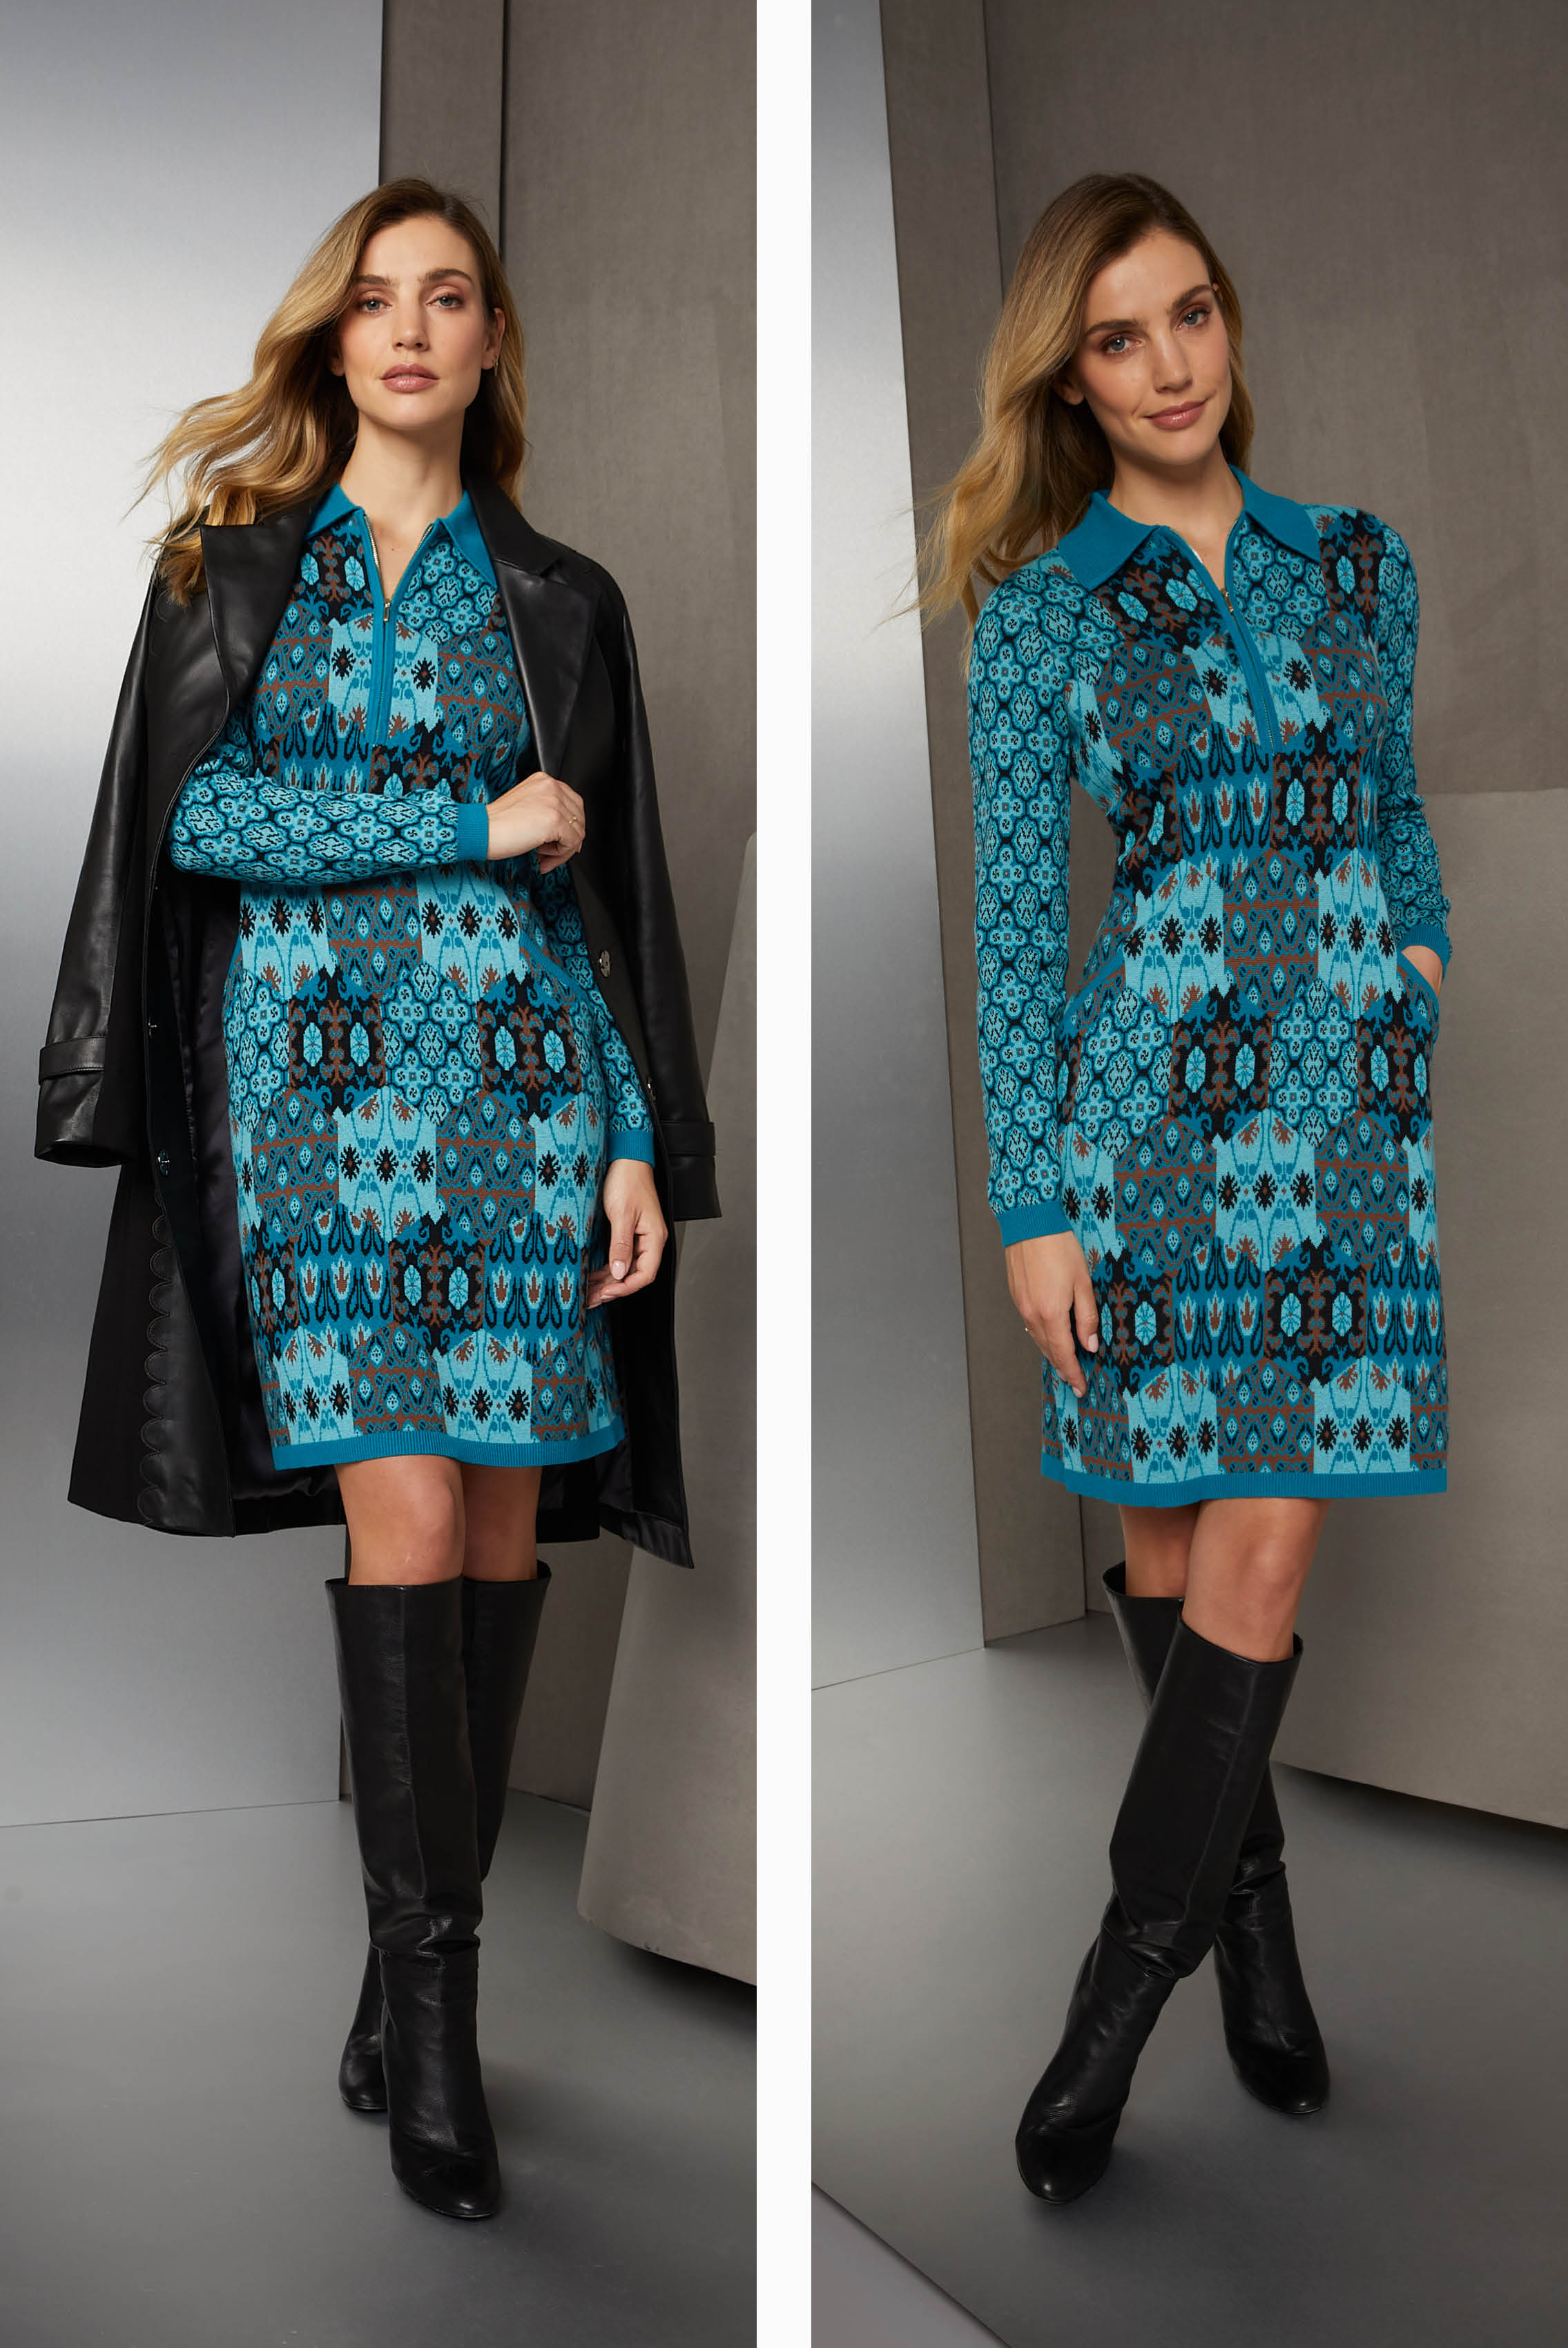 Enjoy intricate patterns in a cashmere-softened cotton knit dress. The posh Minton tiles of Central Park inspired this mixed jacquard look. The body has four distinct hexagonal tile patterns.